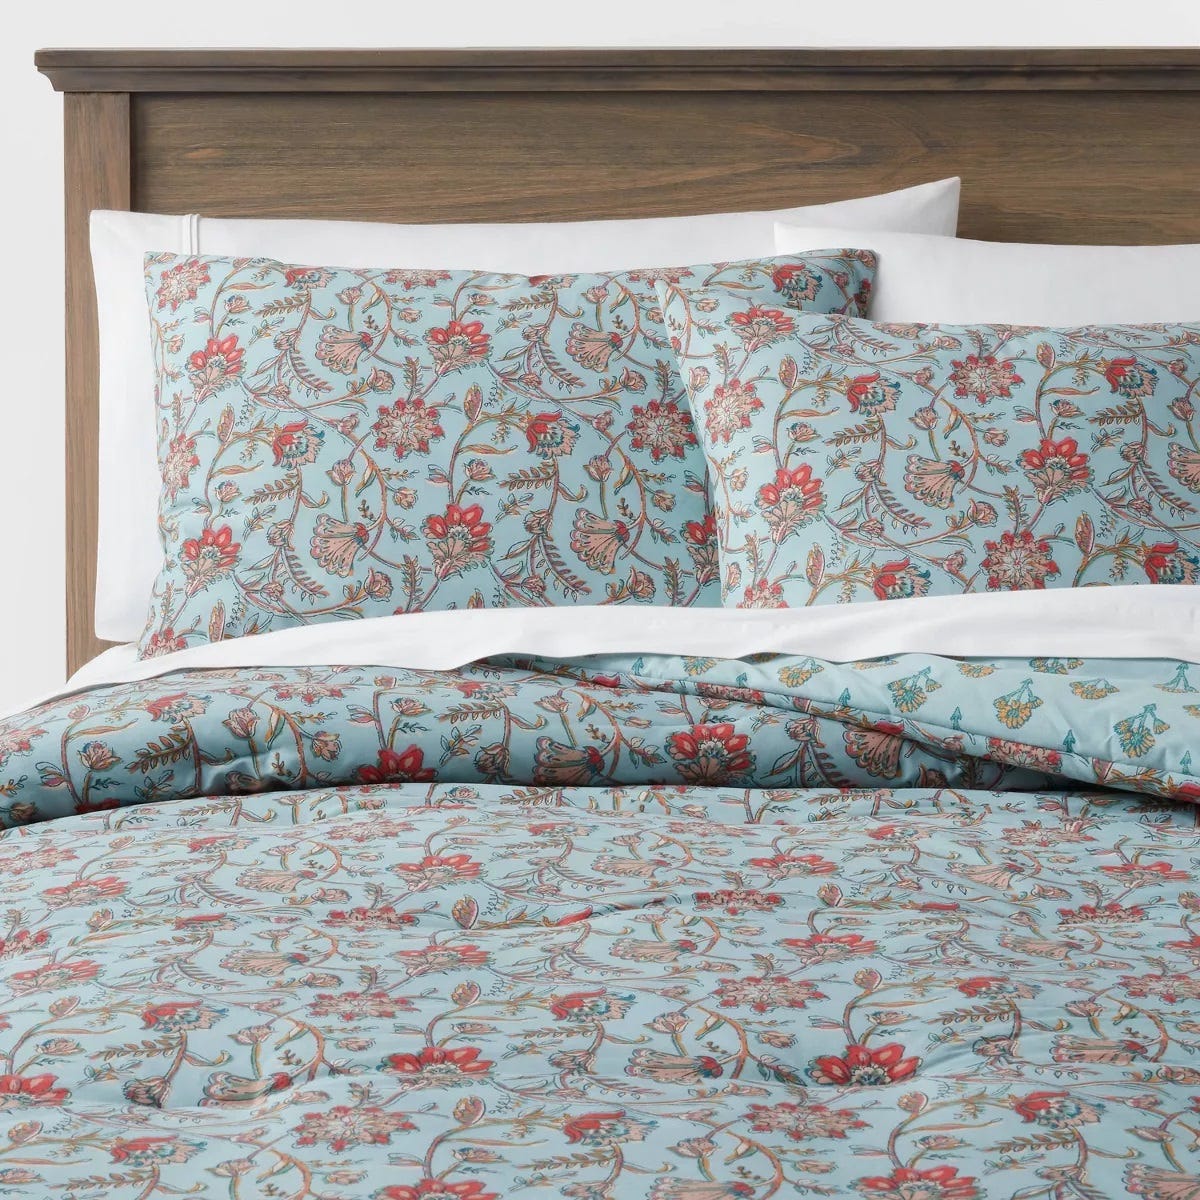 A bedding set with floral pattern, including a duvet cover and pillowcases.